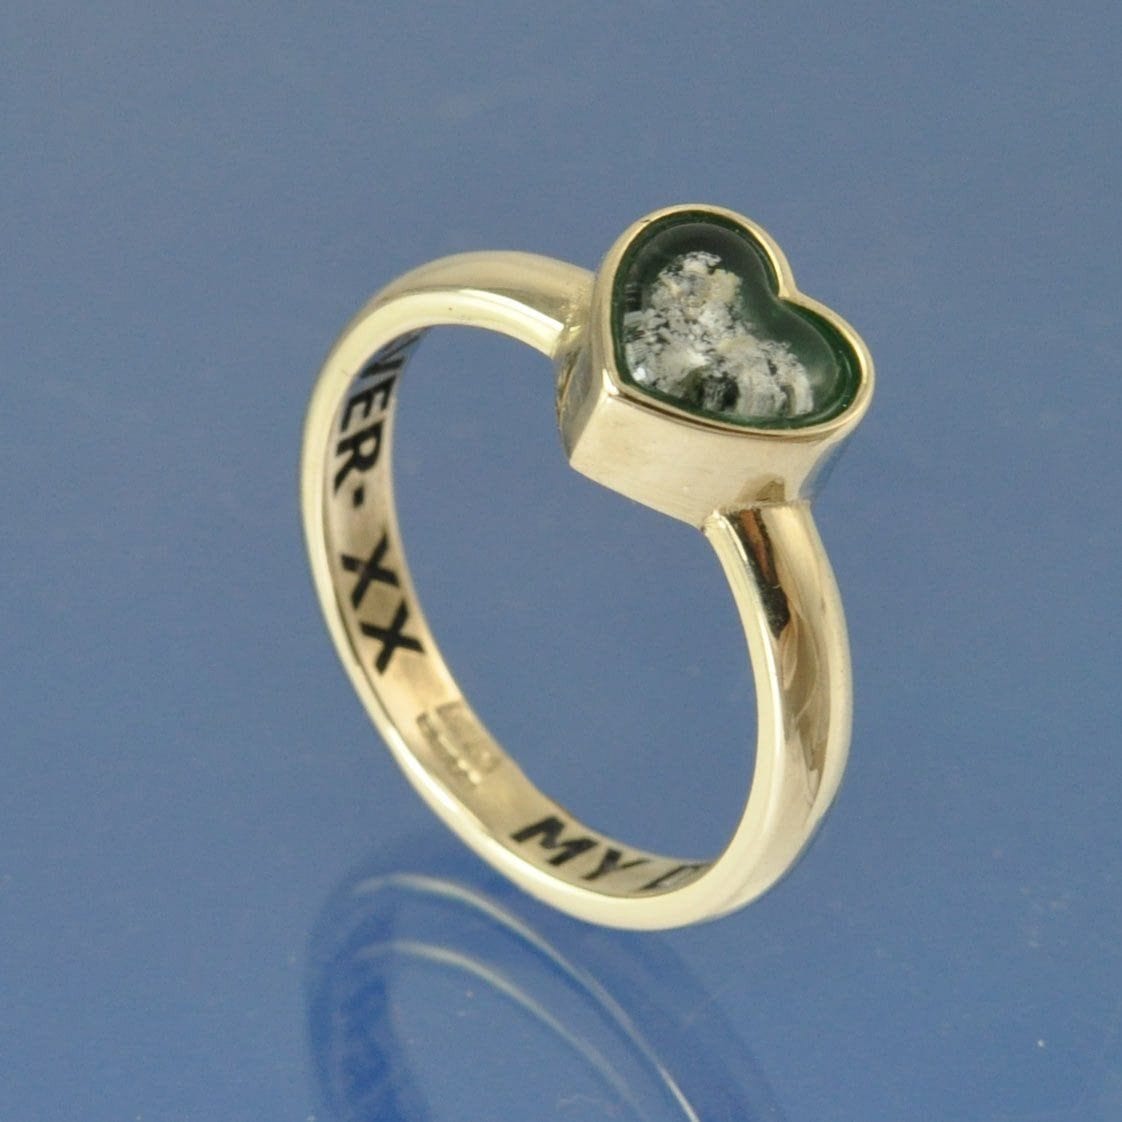 Cremation Ash Ring - Heart Ring by Chris Parry Jewellery